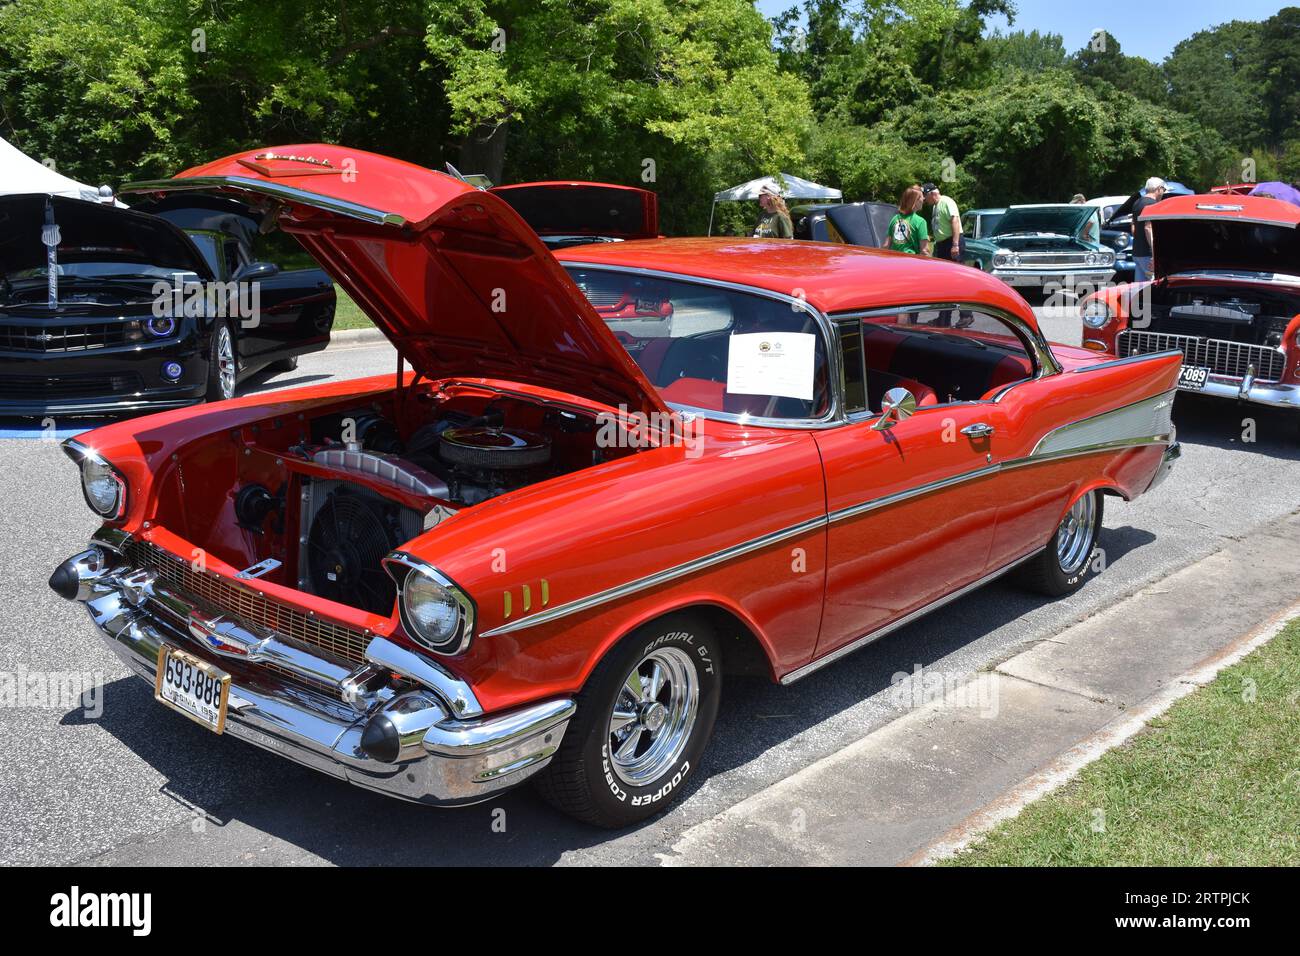 A 1957 Chevrolet Bel Air Hard Top on display at a car show. Stock Photo